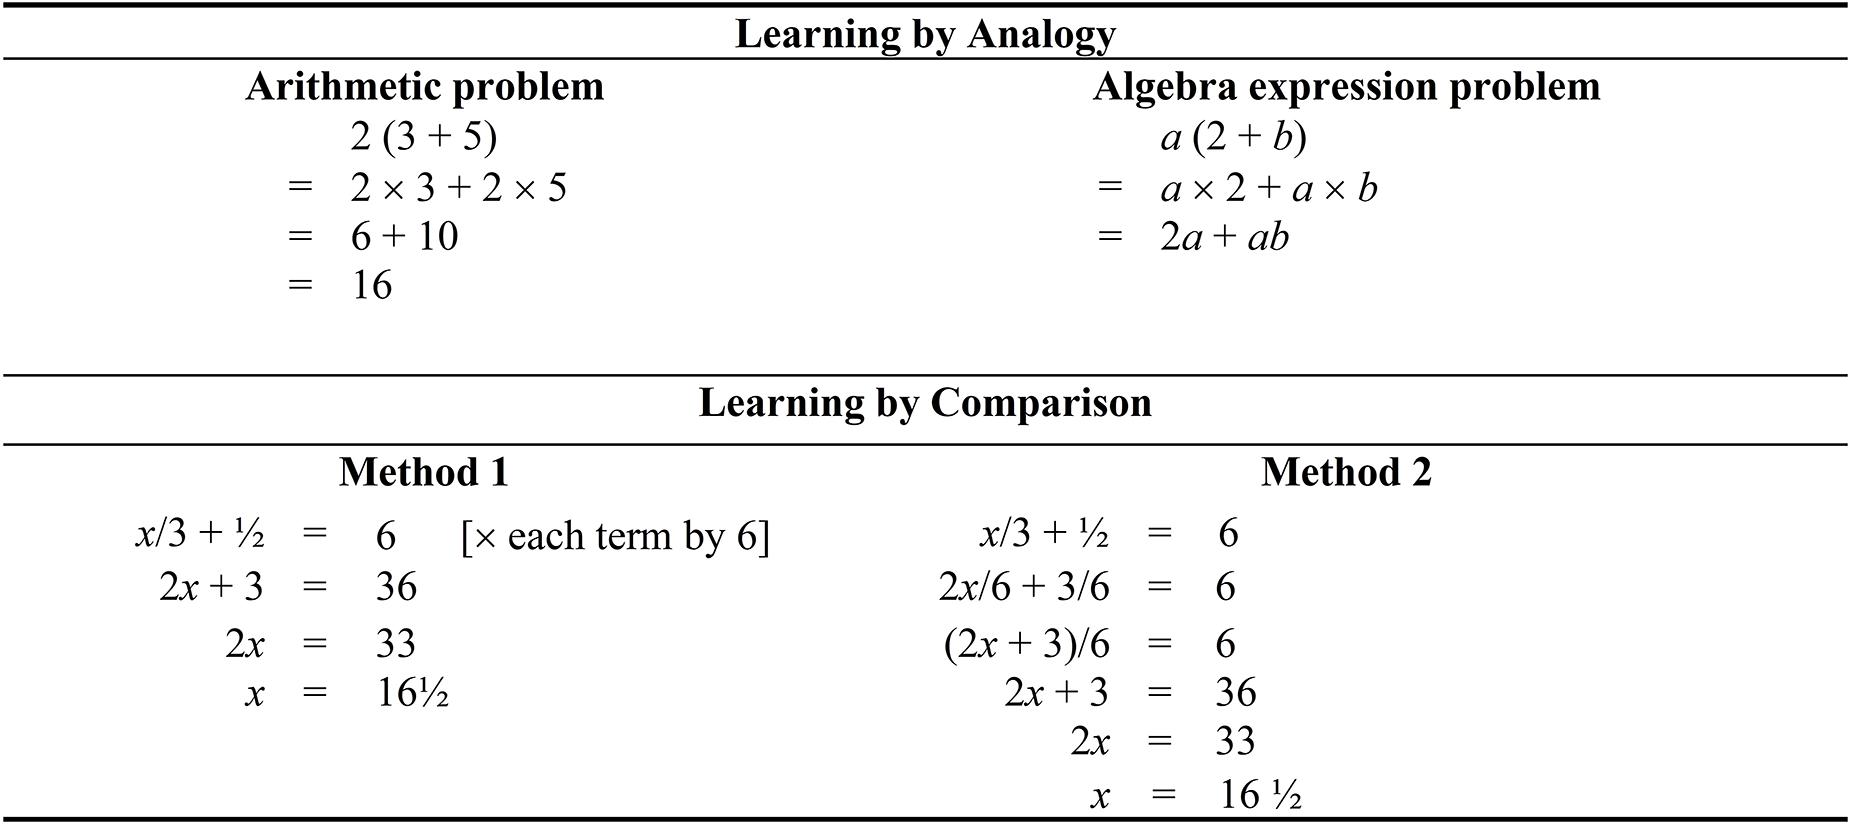 Frontiers Learning To Solve Trigonometry Problems That Involve Algebraic Transformation Skills Via Learning By Analogy And Learning By Comparison Psychology